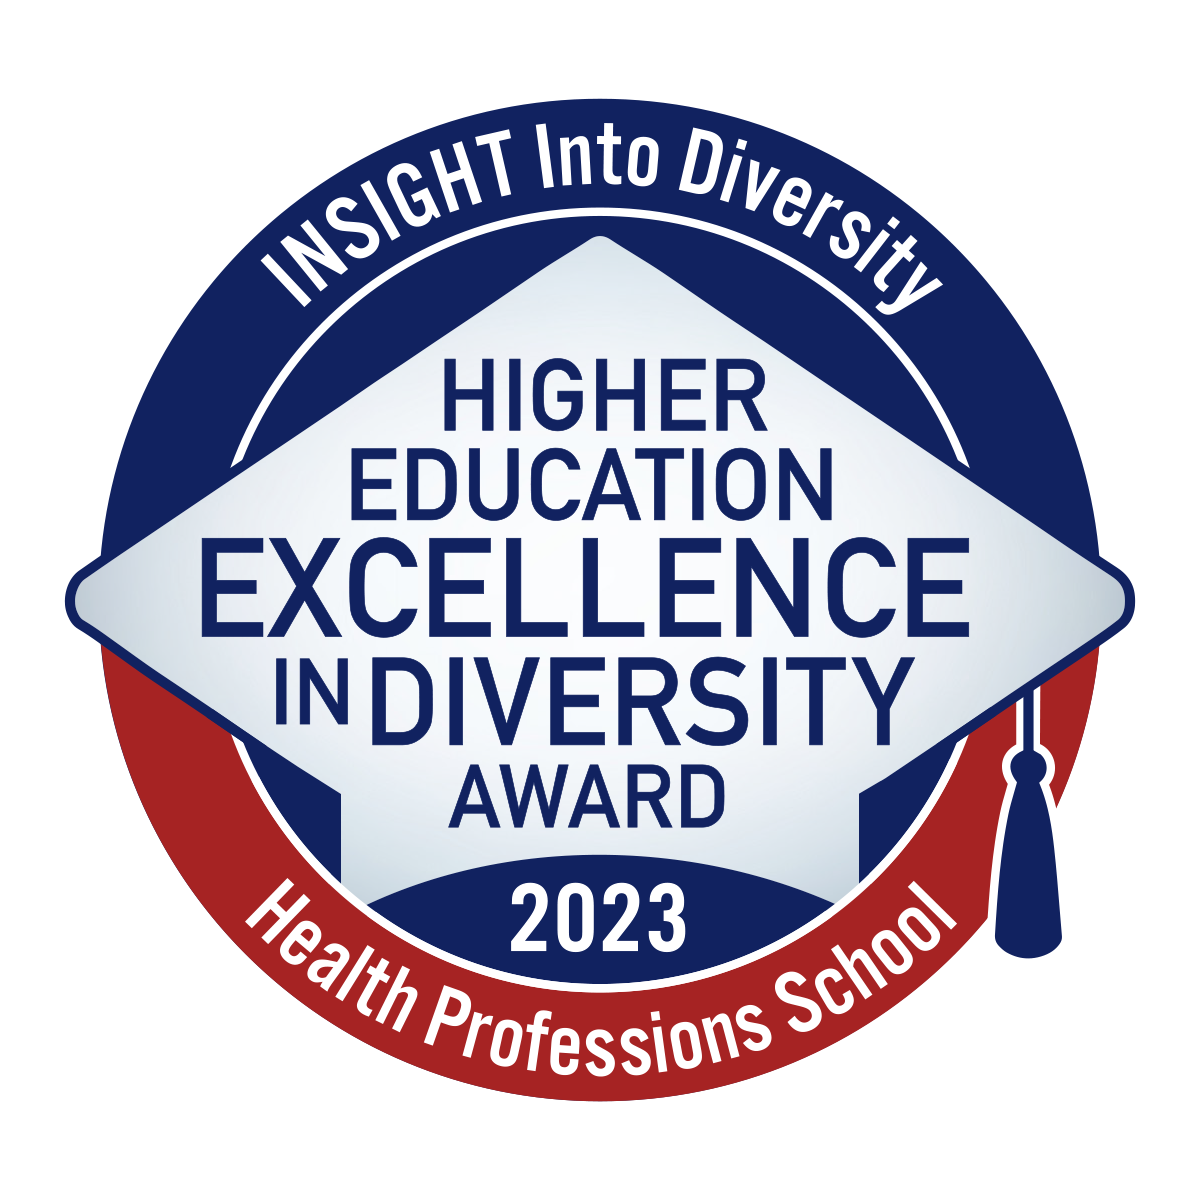 INSIGHT Into Diversity Health Professions School Higher Education Excellence in Diversity Award 2023